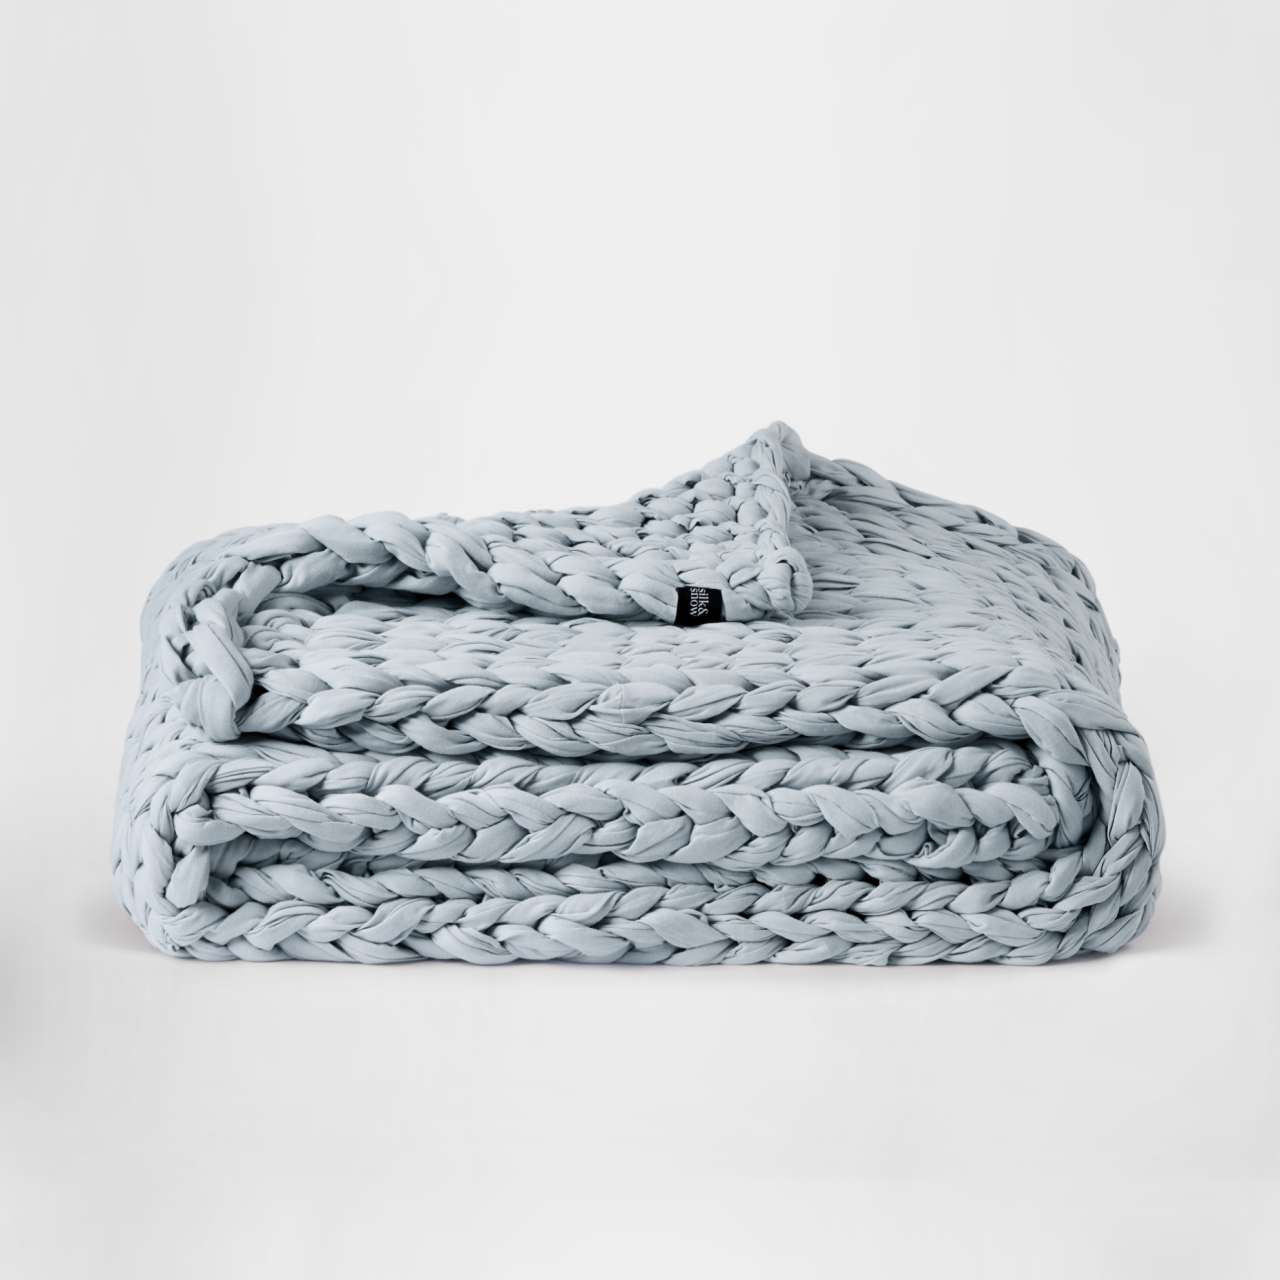 Hand Knitted Weighted Blanket Image 2